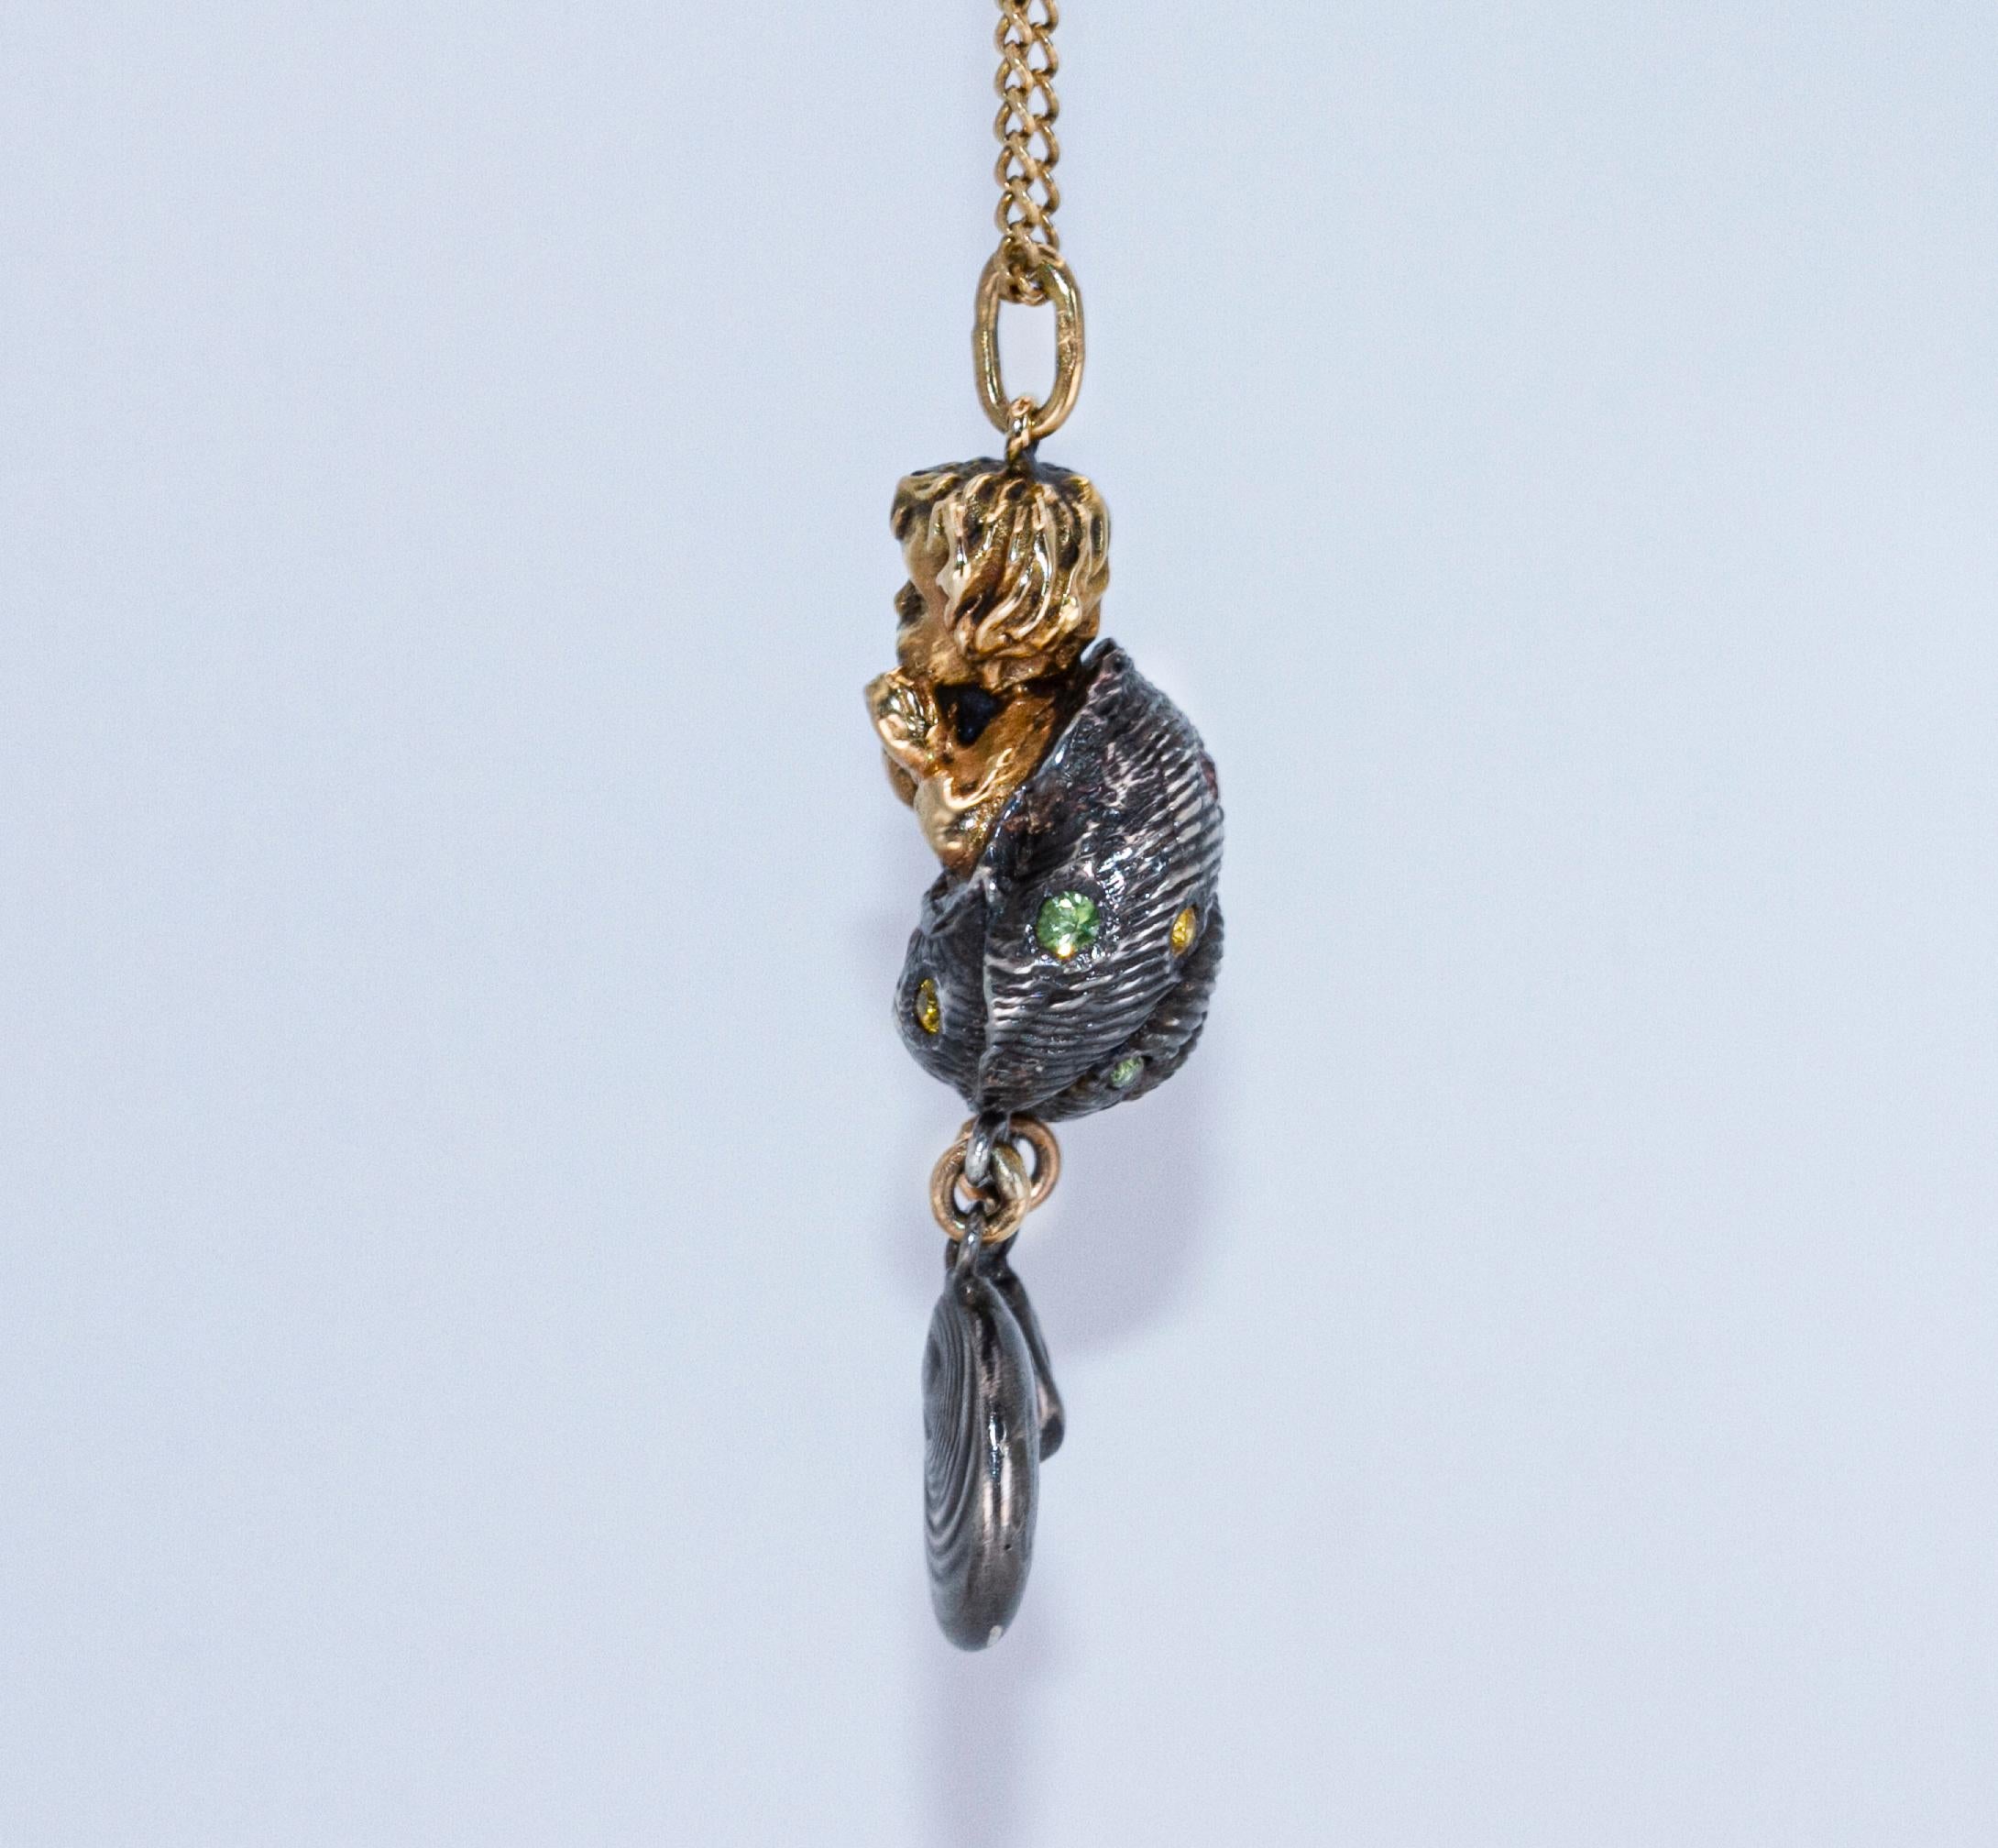 This one of a kind pendant is imagined and sculpted by hand by the French jeweller artist Binliang Alexander Peng.

This pendant is composed of yellow sapphires, green sapphires and baby pink Rubellite set in 11 grams of 18k gold and 17.5 grams of